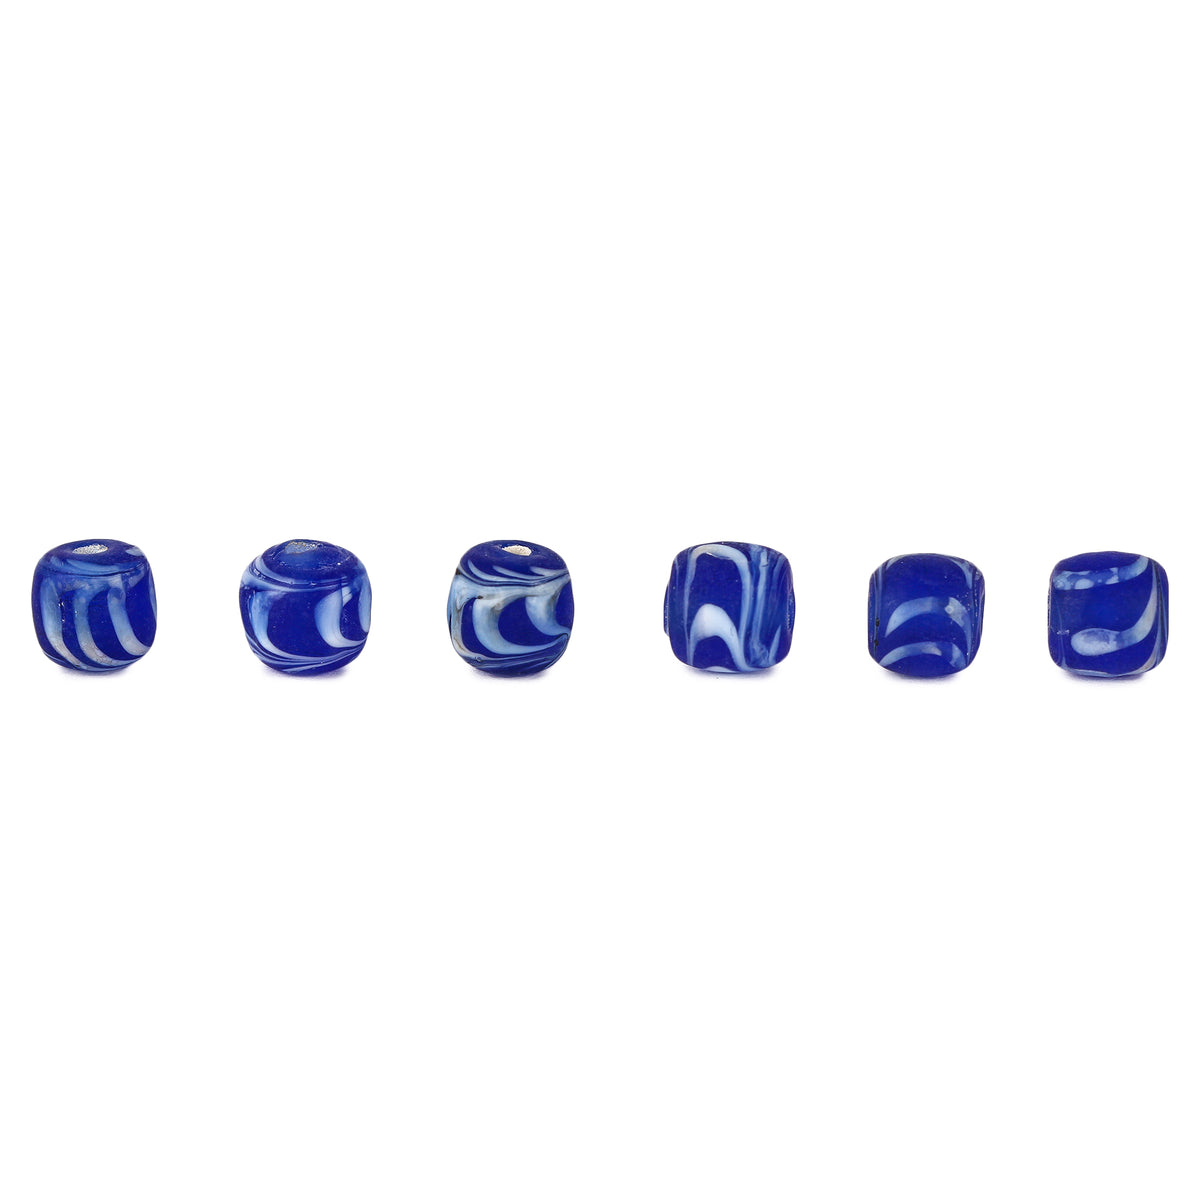 Blue glass bead with white decor